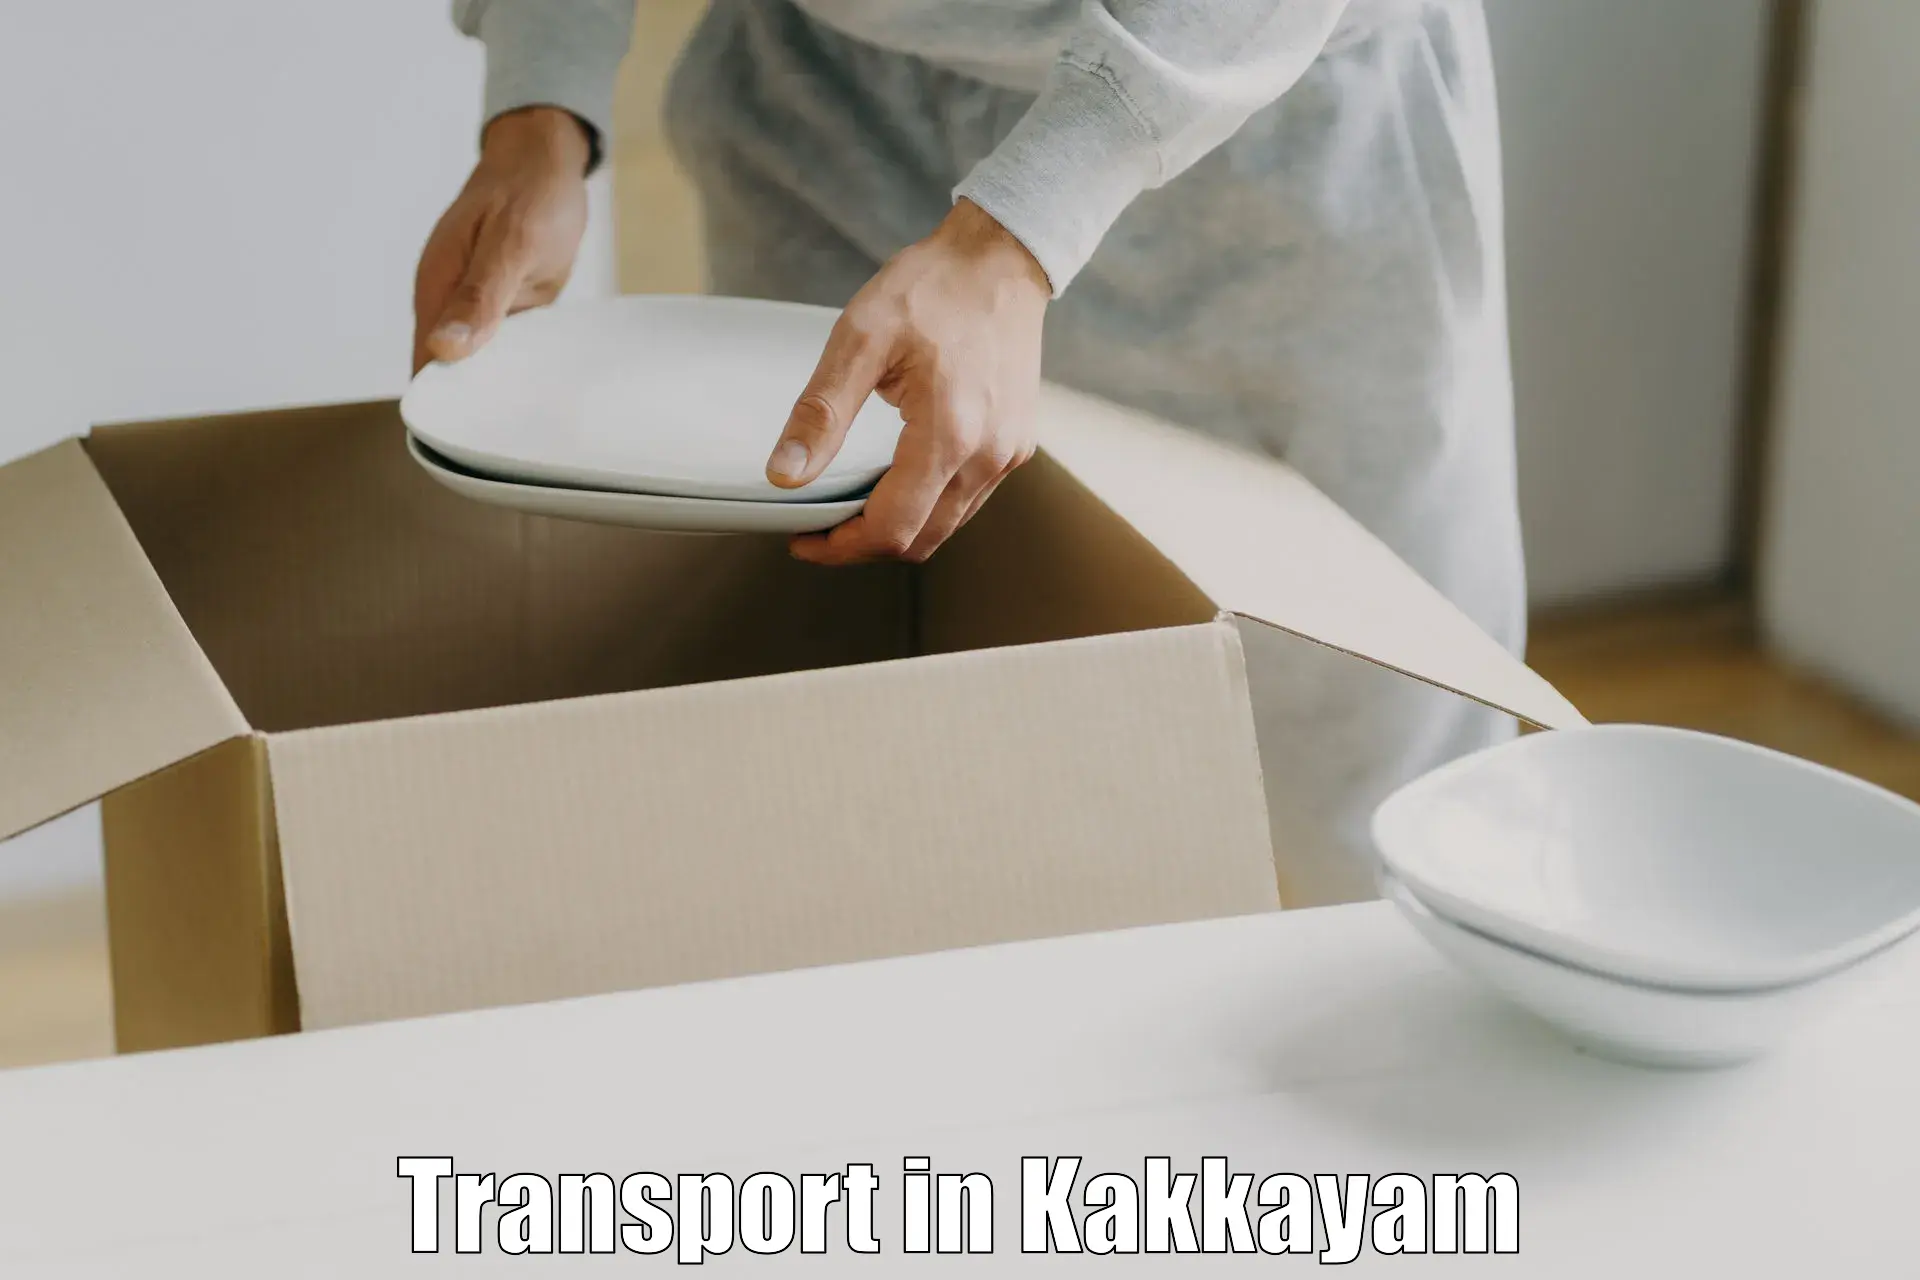 Transport bike from one state to another in Kakkayam